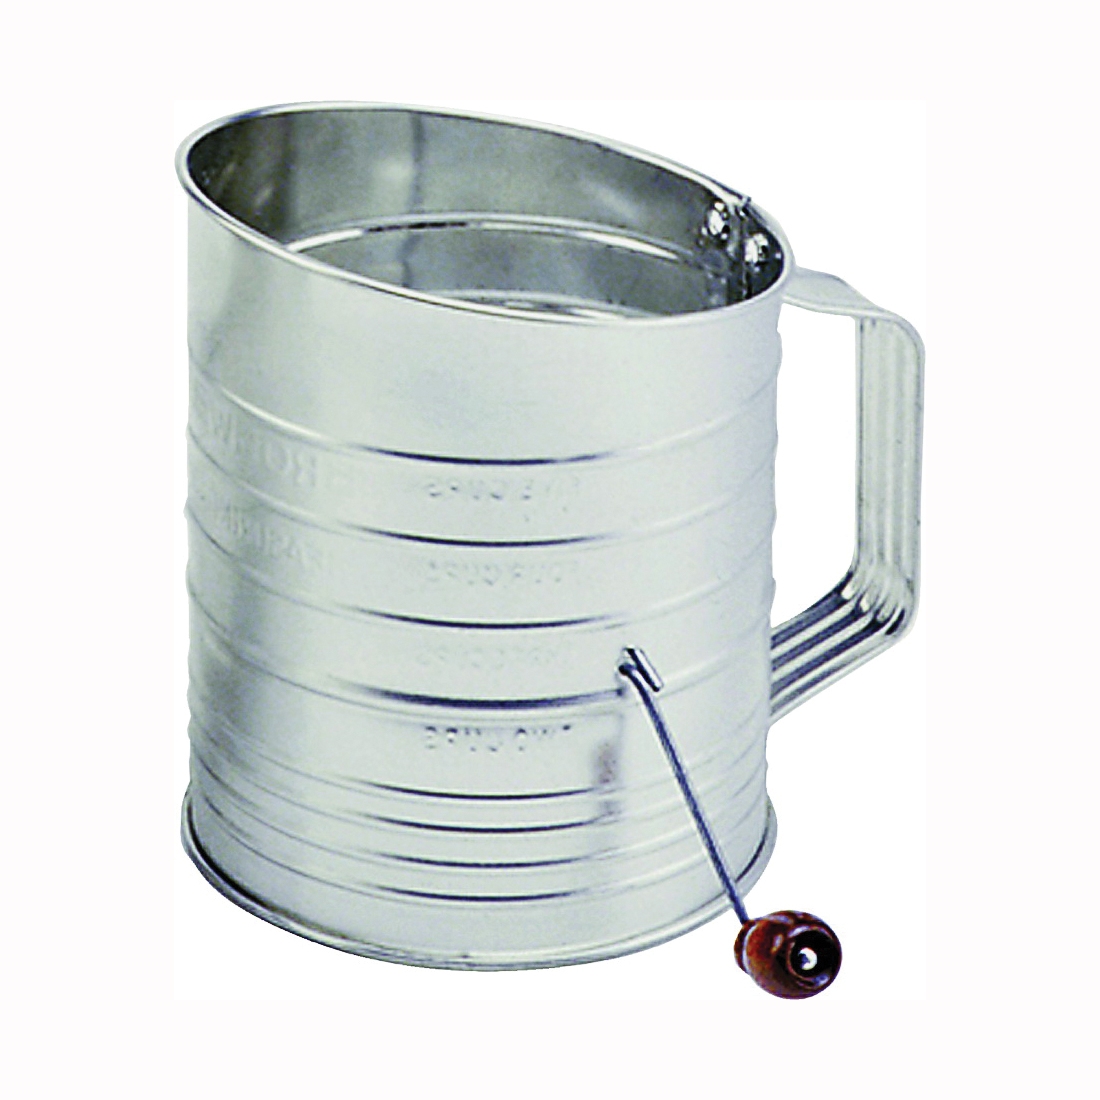 137 Hand Crank Sifter, 40 oz, 5 in H, Stainless Steel